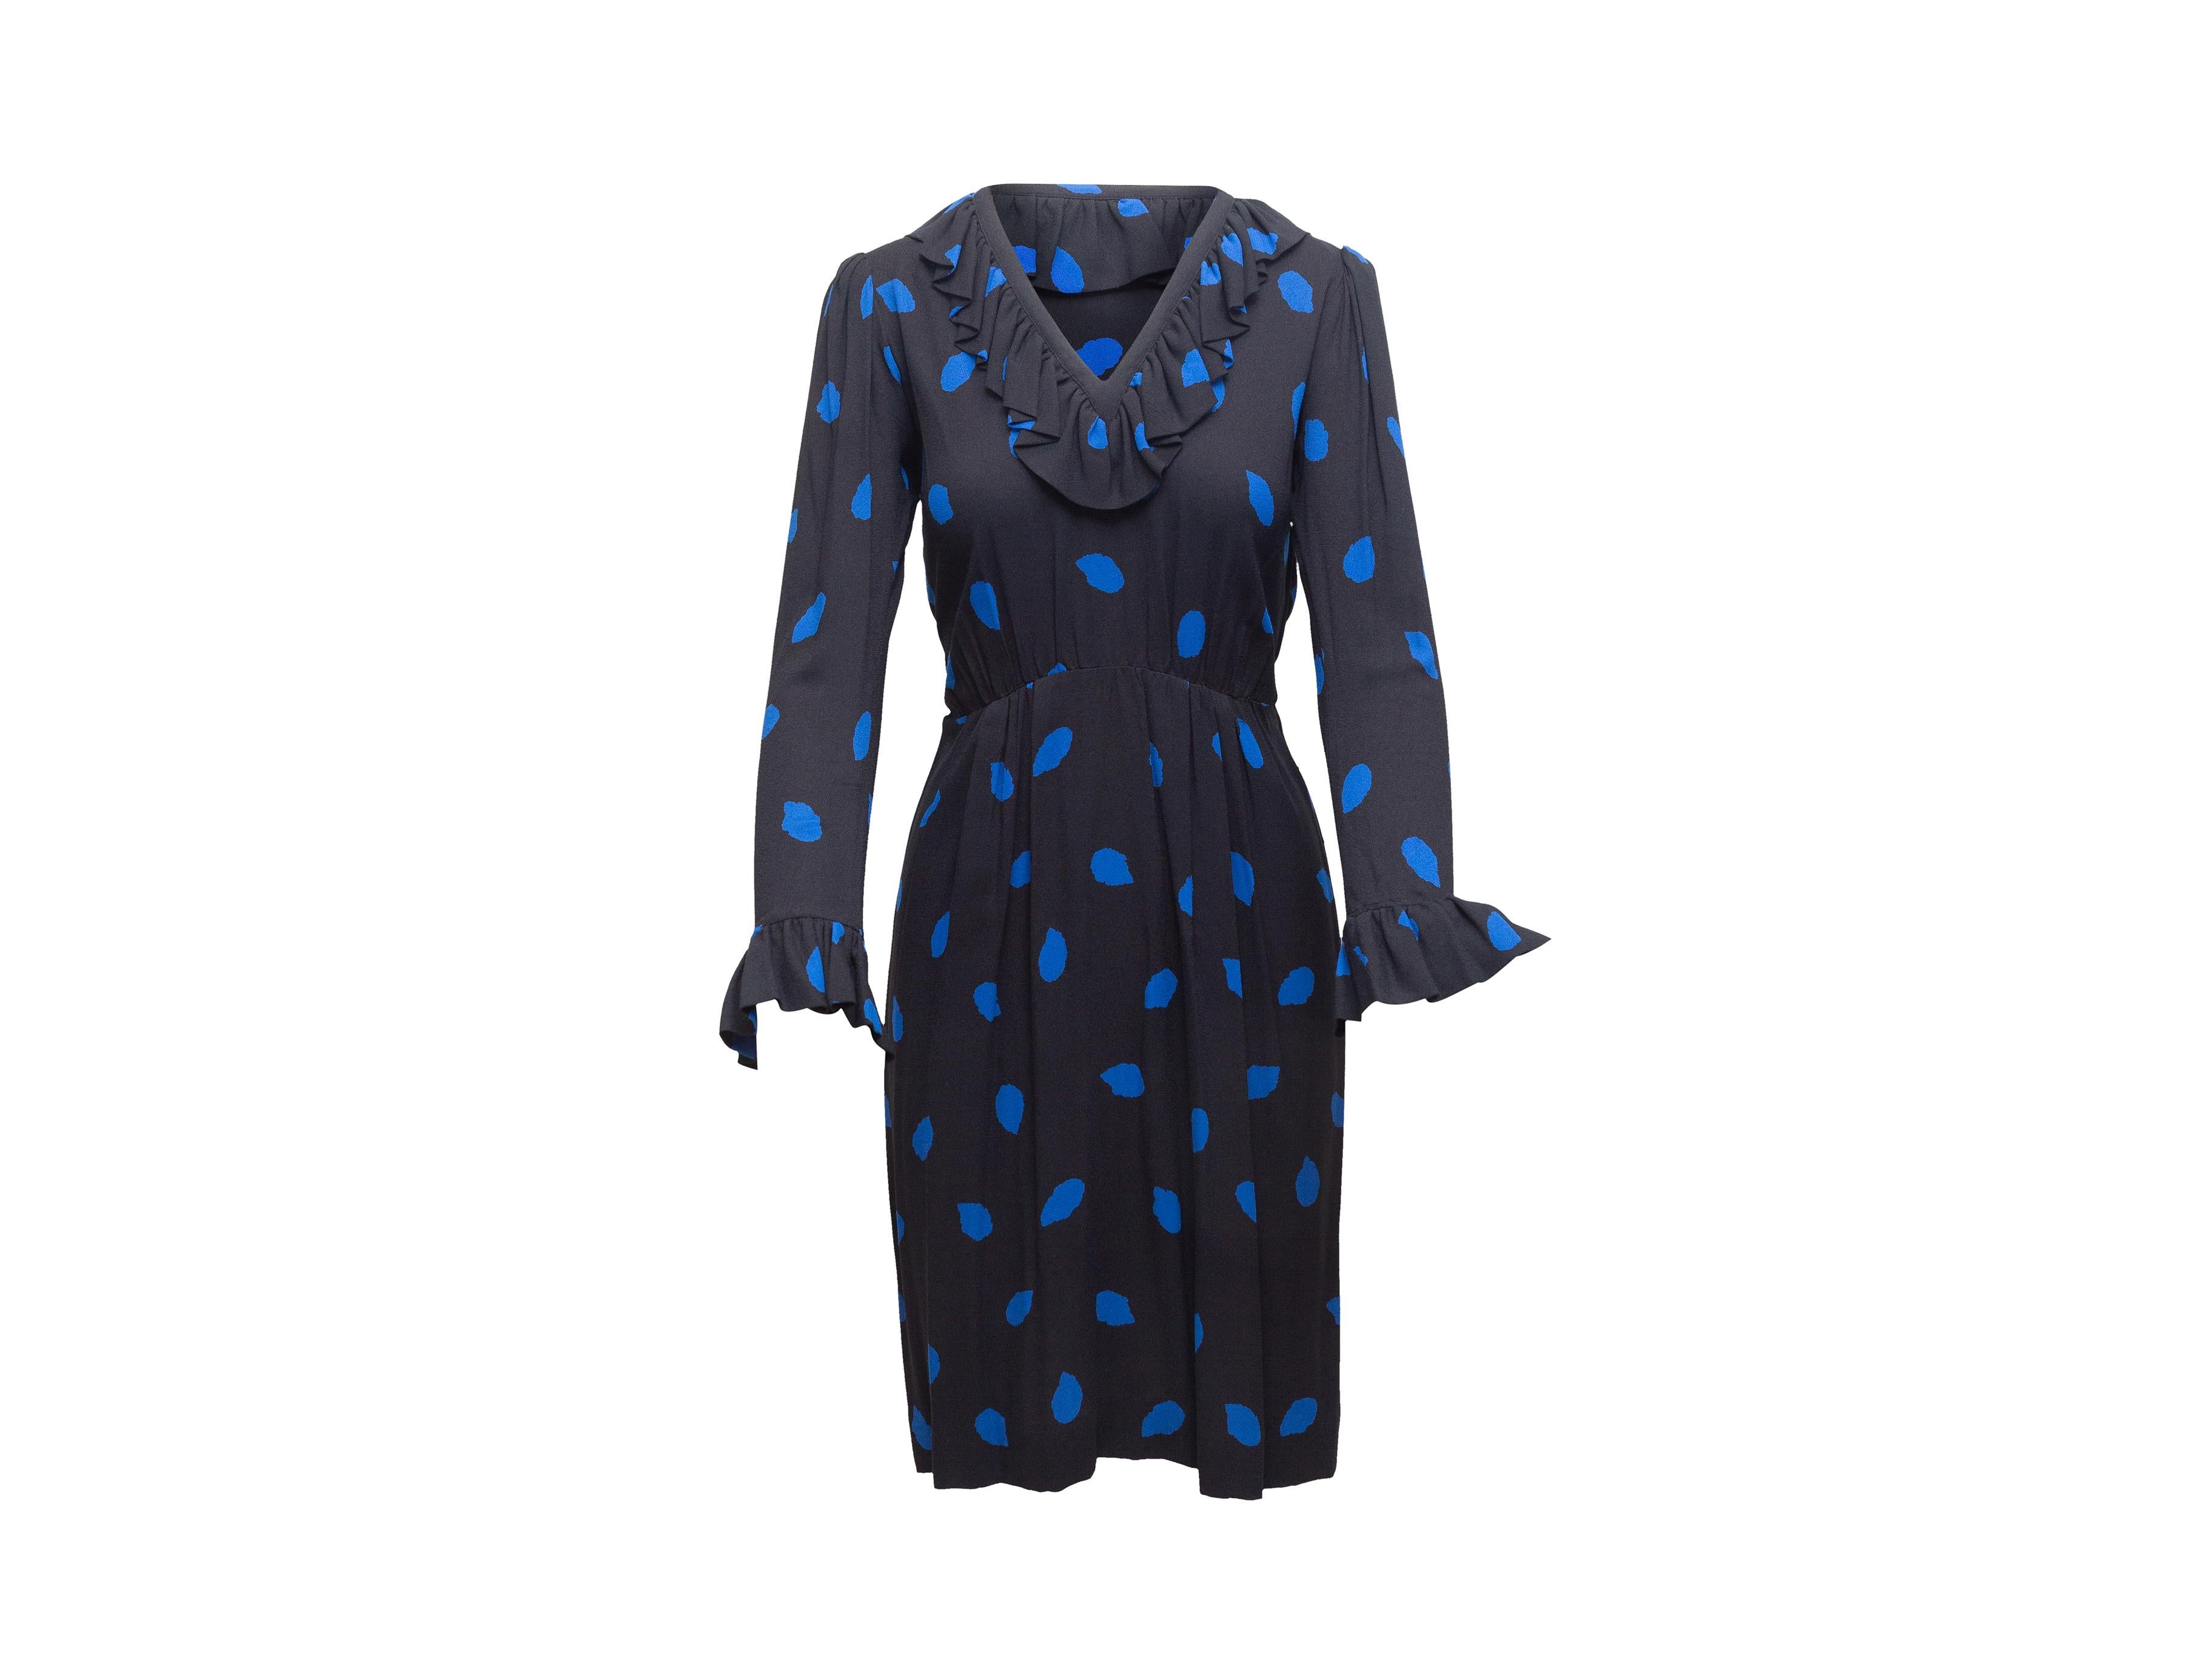 Product details: Vintage black and blue polka dot print dress by Saint Laurent. Ruffle trim throughout. V-neck. Long sleeves. 32